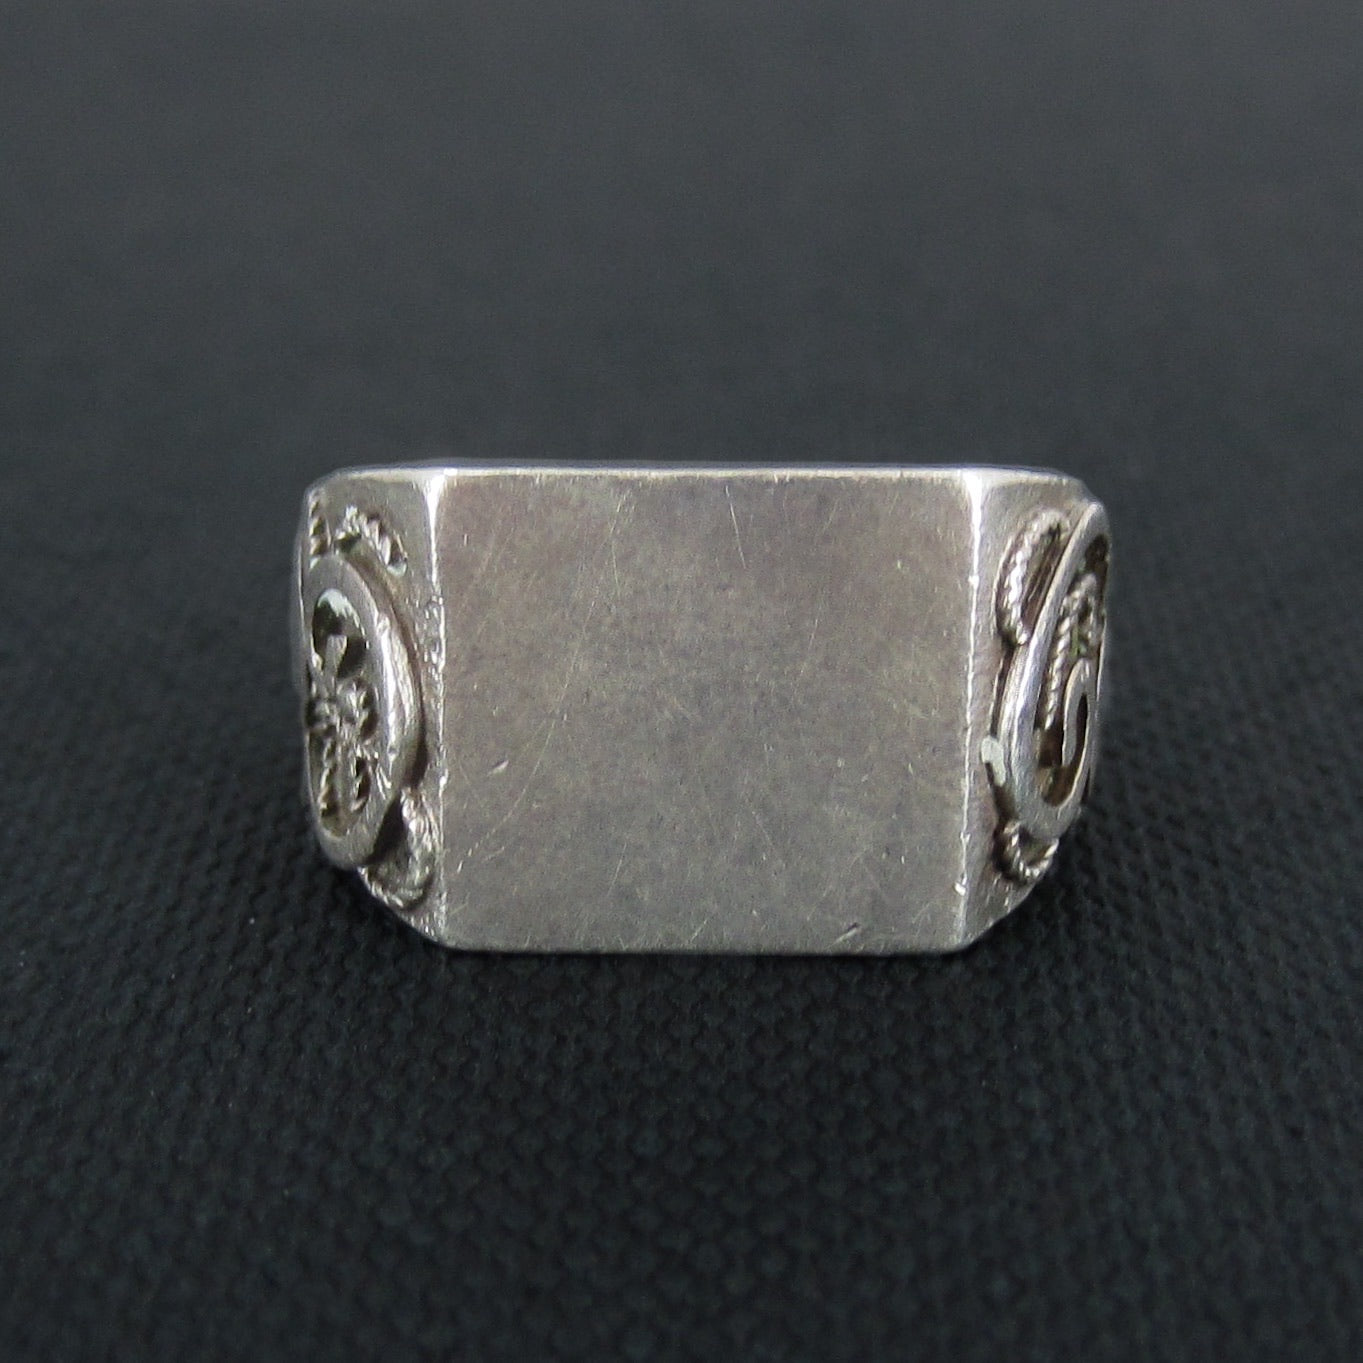 SOLD-Art Deco French Signet Ring Sterling c. 1920